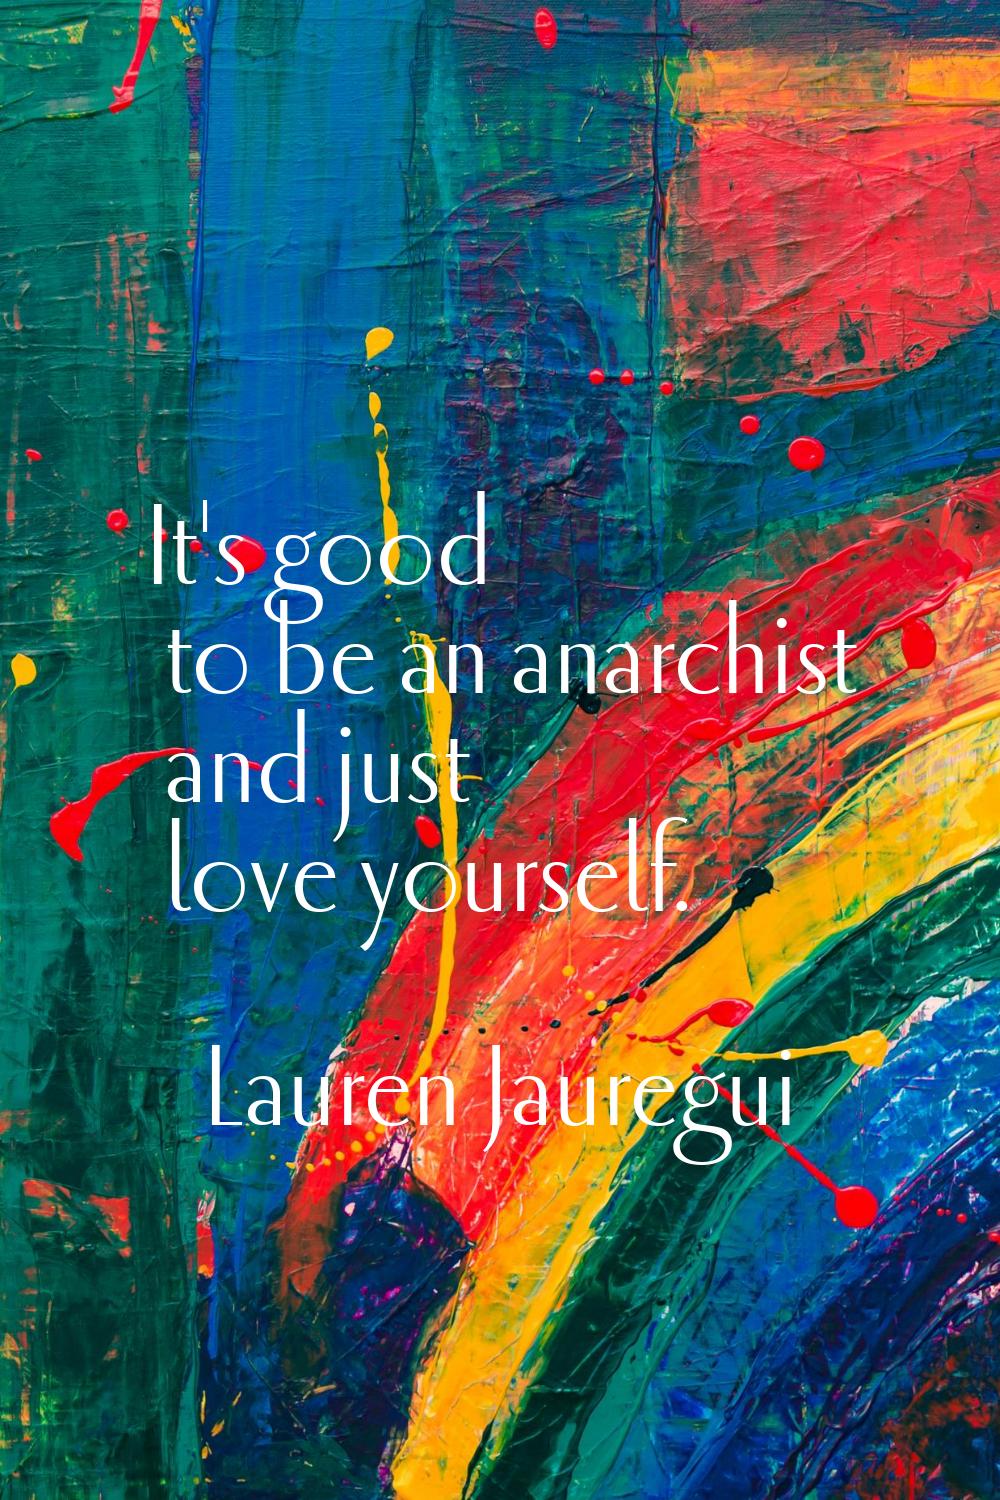 It's good to be an anarchist and just love yourself.